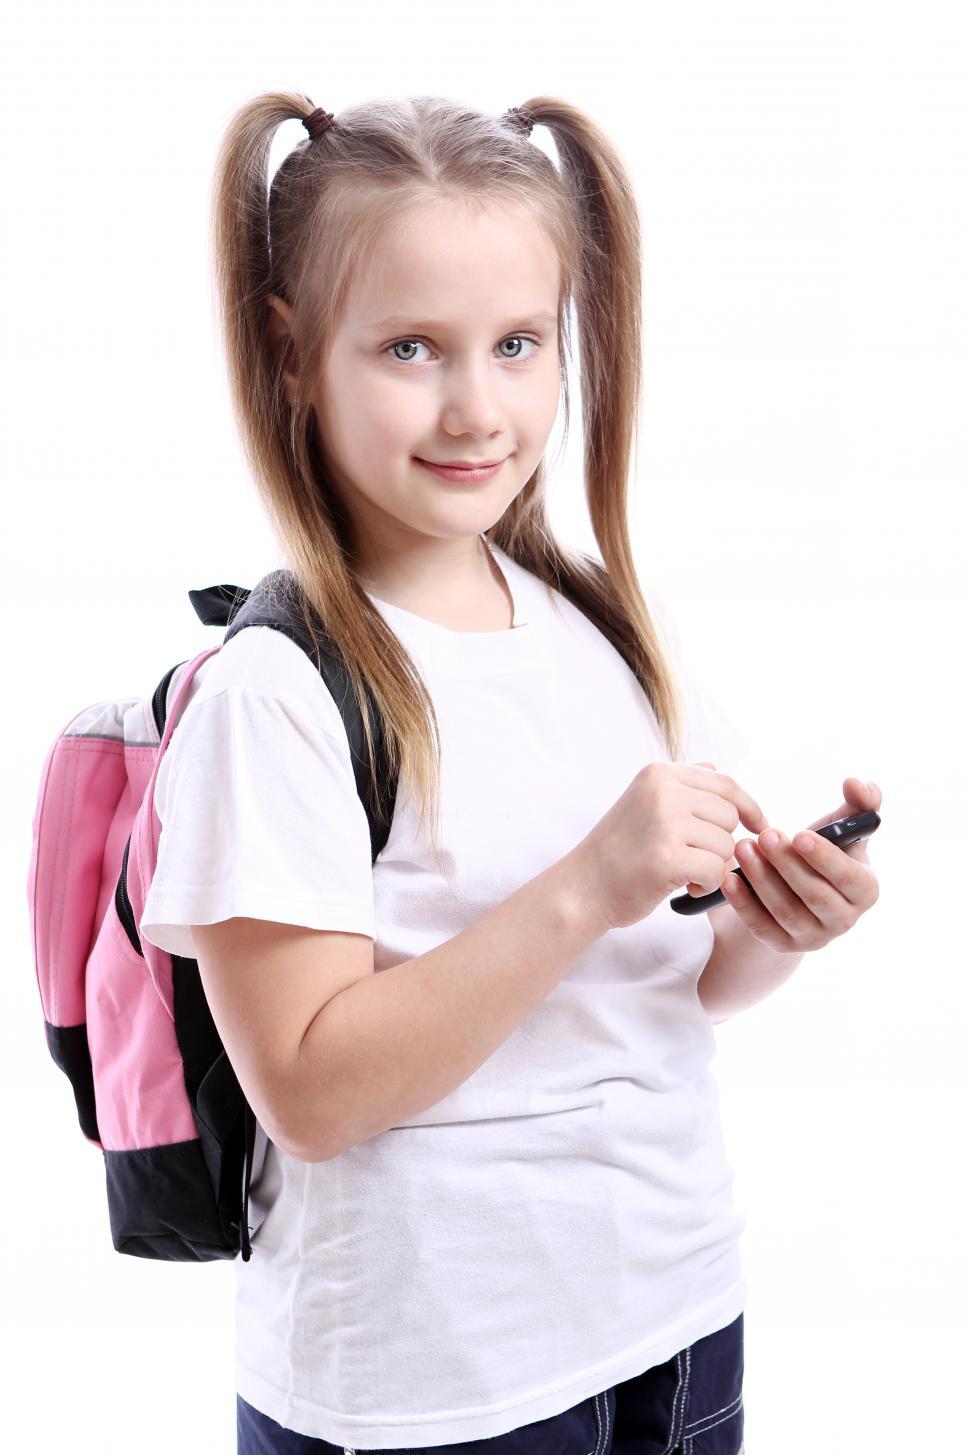 Free Image of Cute schoolgirl with cellphone 